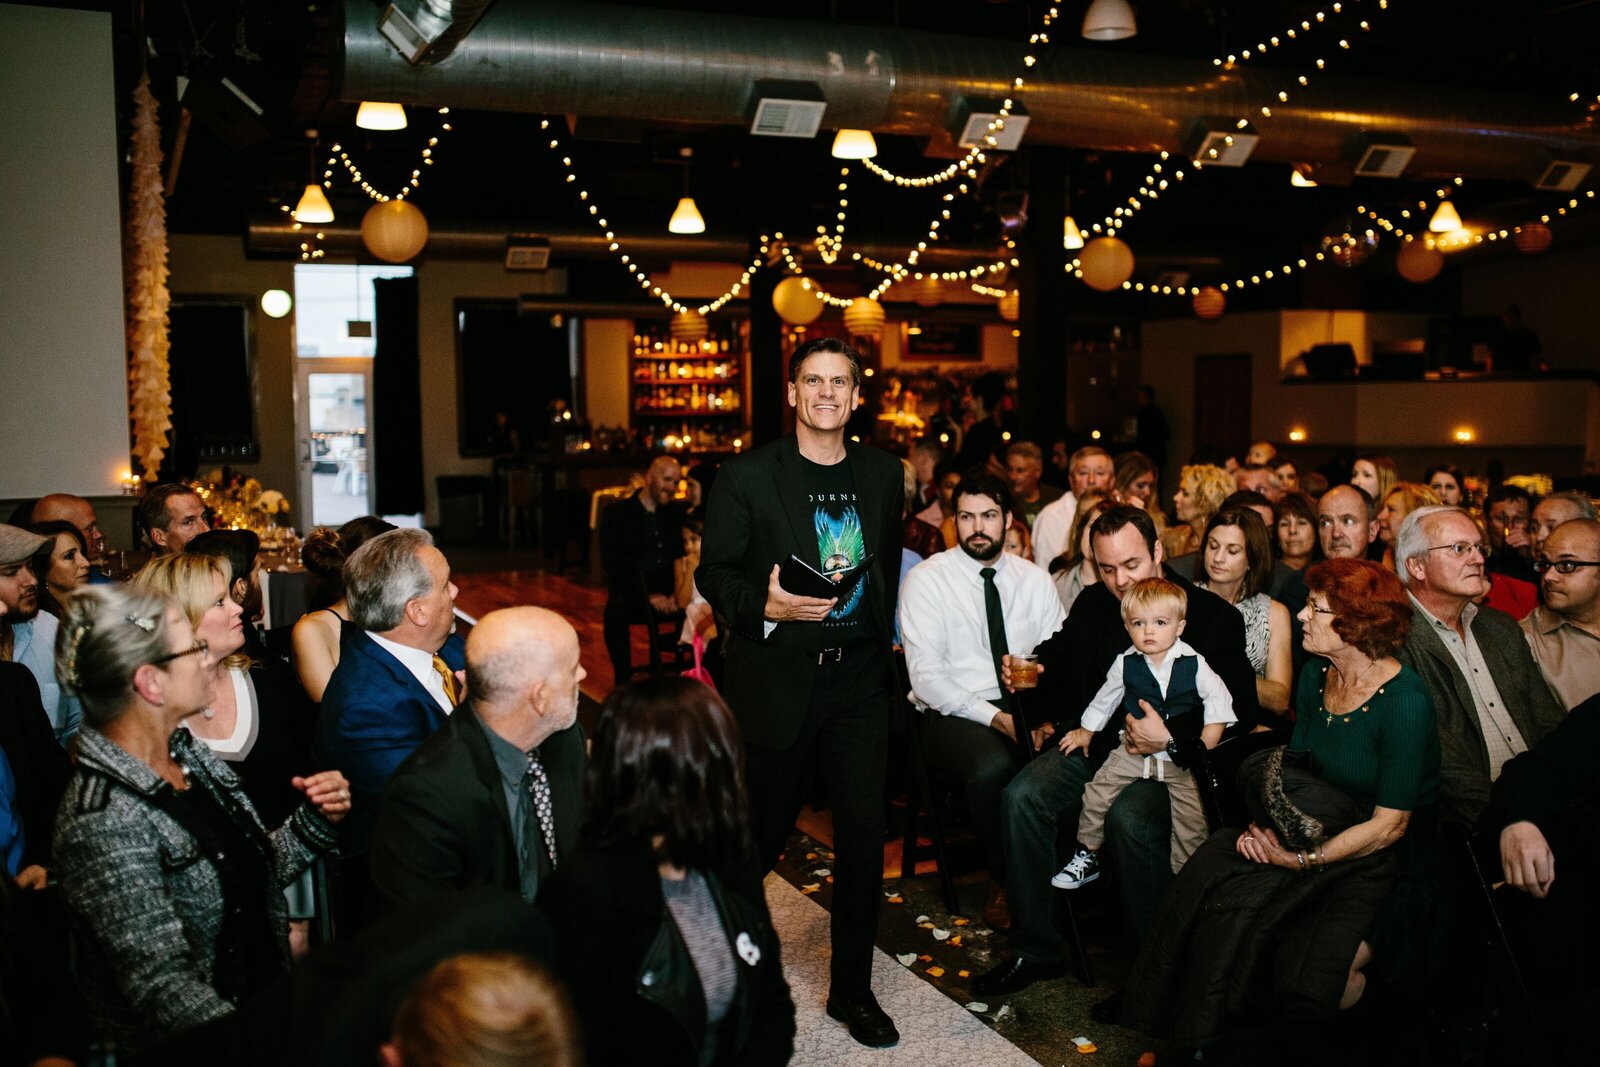 Wedding officiant walks down aisle to prepare to lead a wedding ceremony